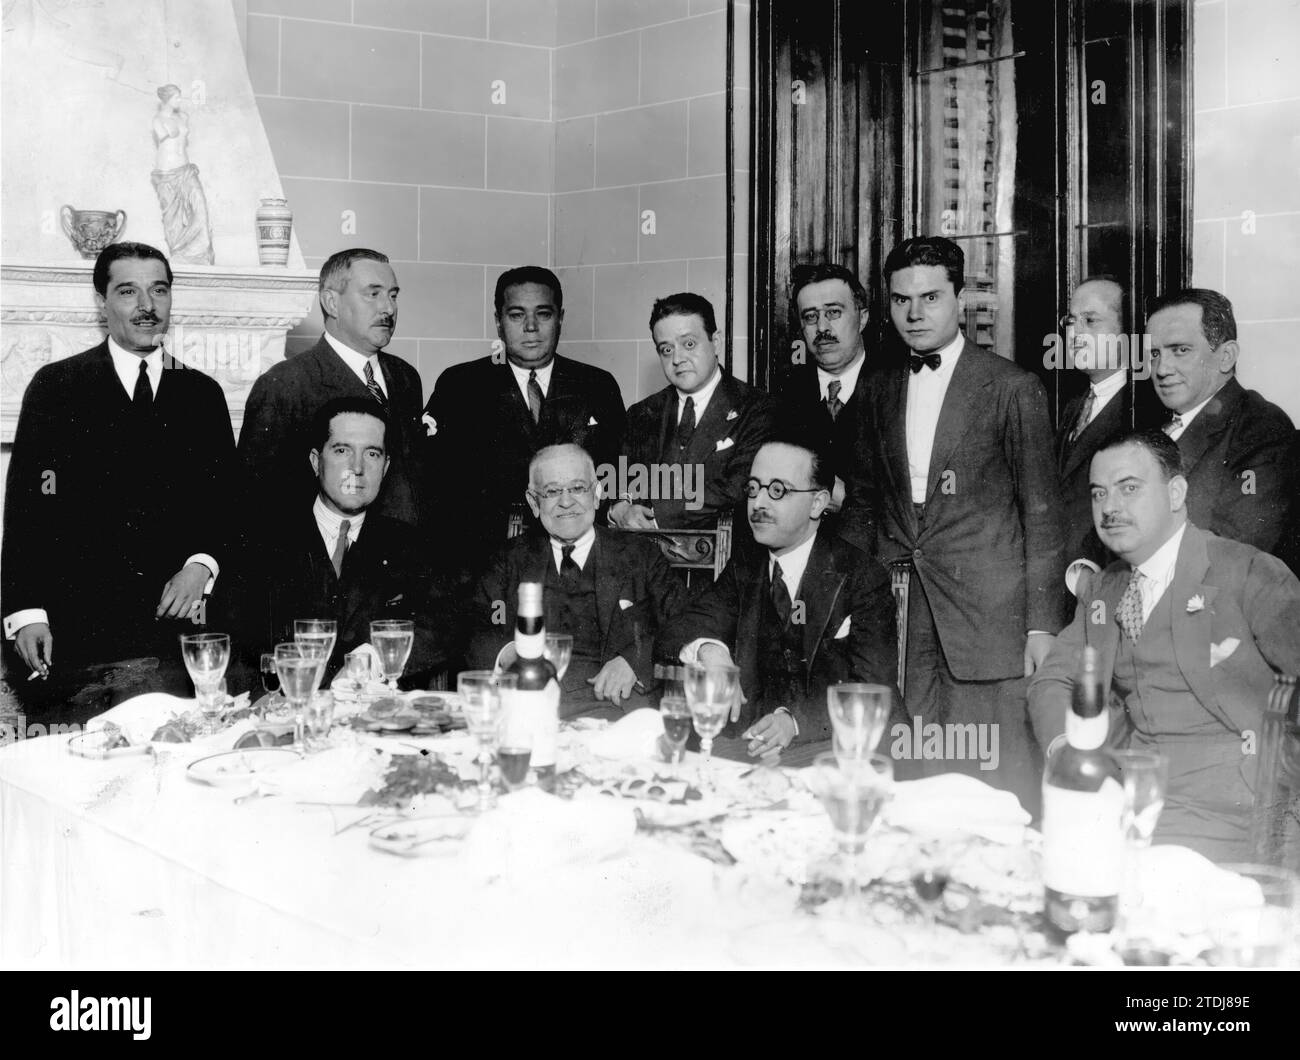 09/30/1926. Madrid. In the editorial office of 'vida Medica'. Group of Editors and Collaborators of the accredited Professional magazine, 'vida Medica', at the inauguration of its Hall for Conferences and Exhibitions of Works of Art Made by Doctors. Credit: Album / Archivo ABC / Pío Stock Photo